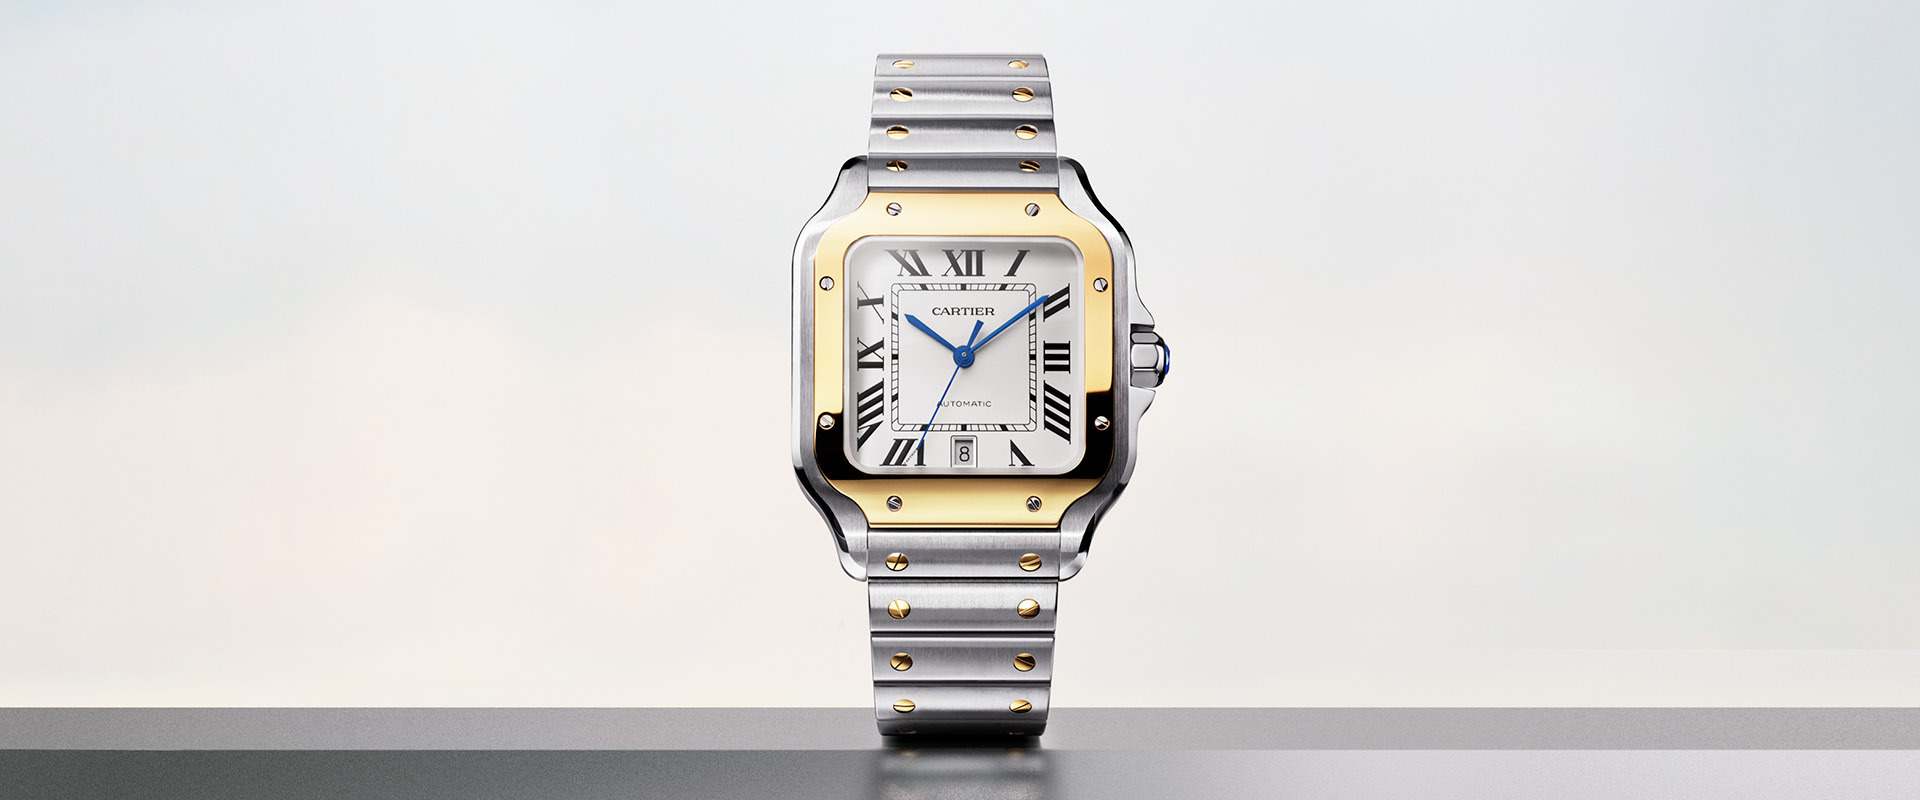 Santos Cartier watch on a gray background